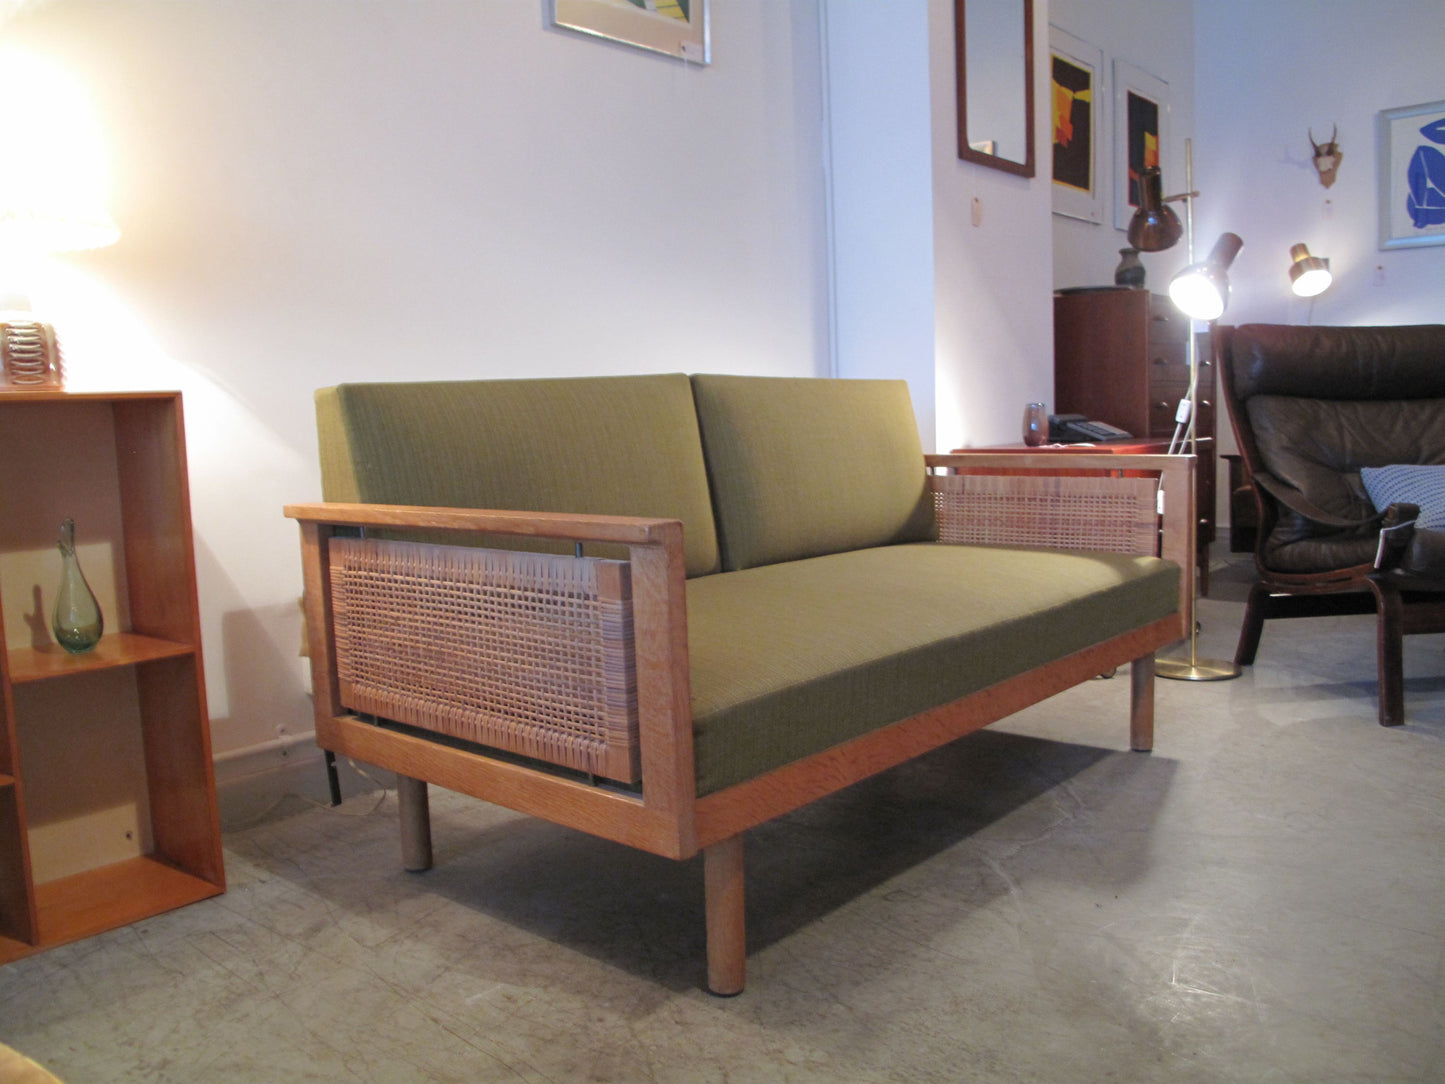 Sofabed with rattan sides